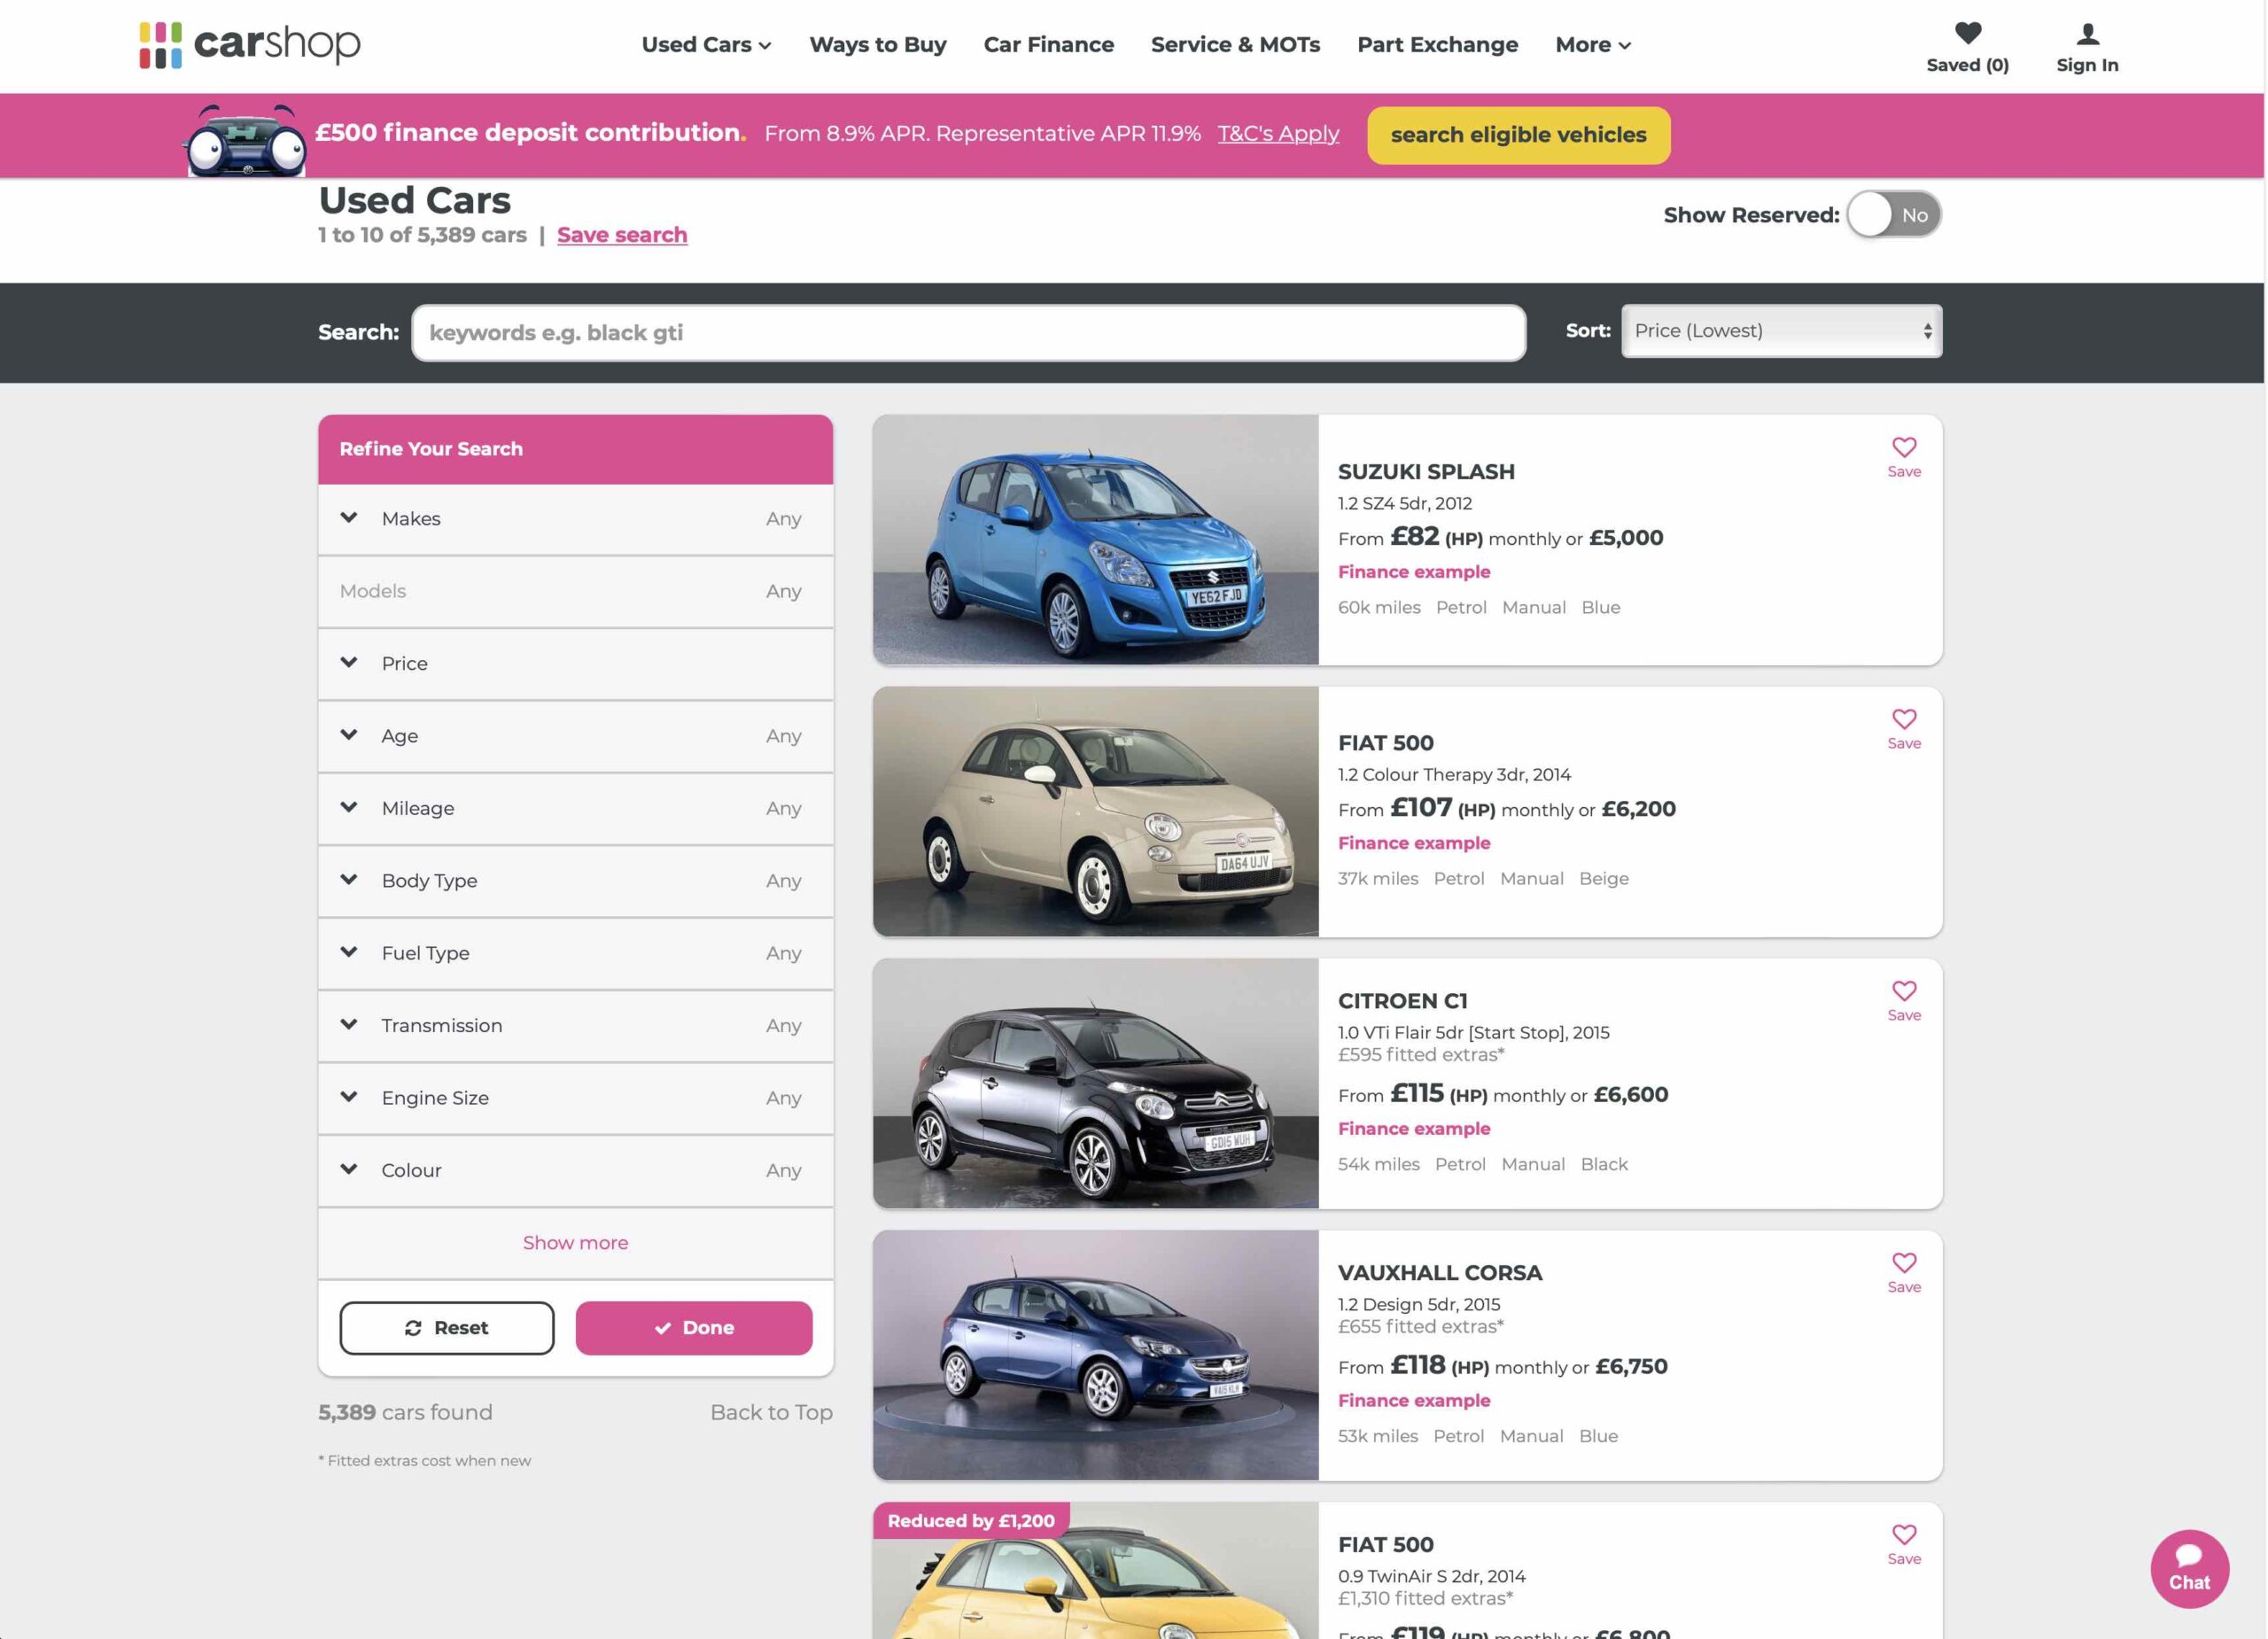 carshop-used-cars-page